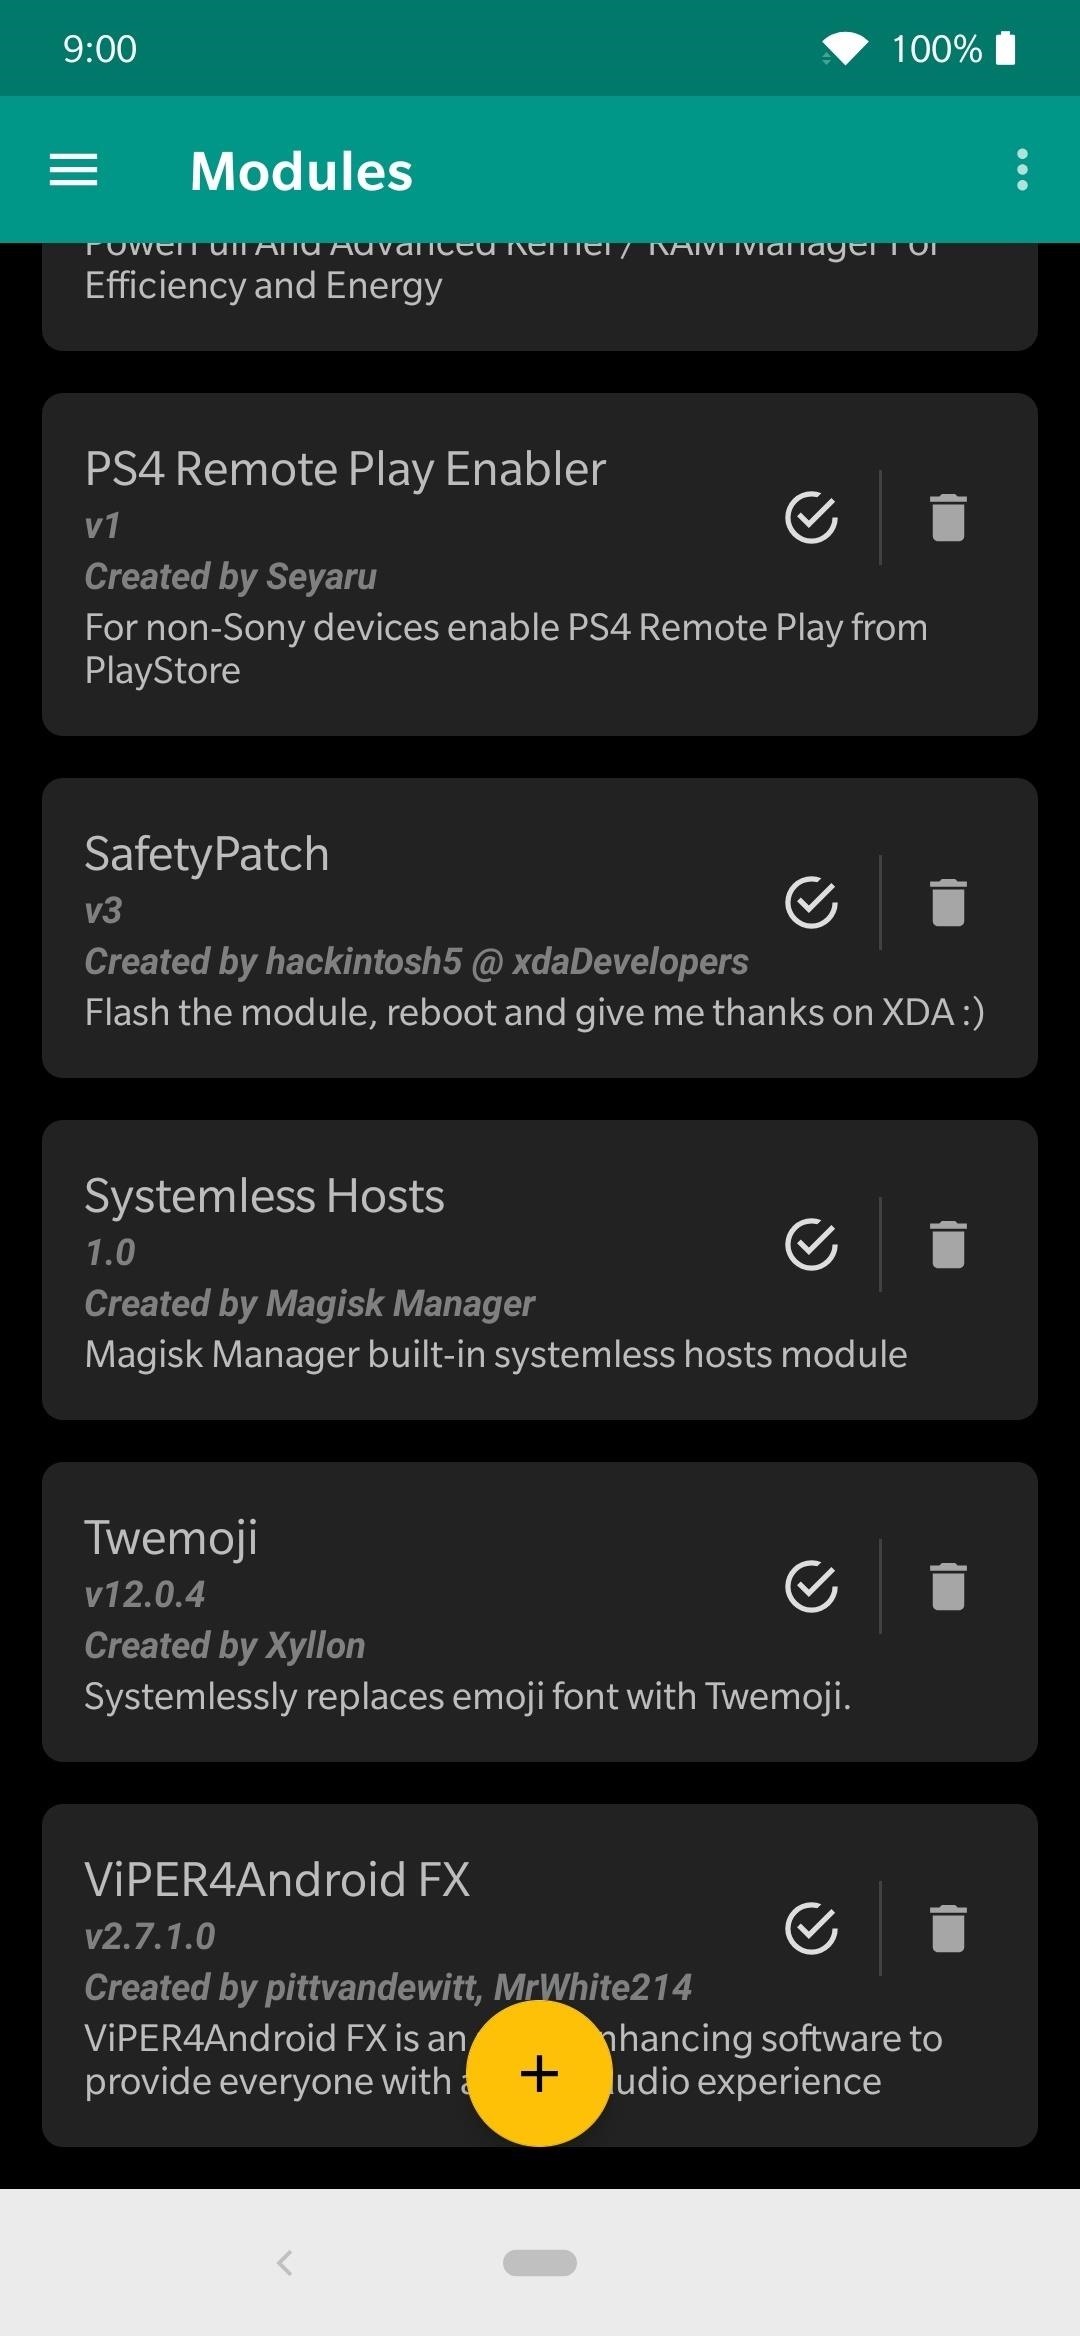 How to Enable Dark Mode in Magisk